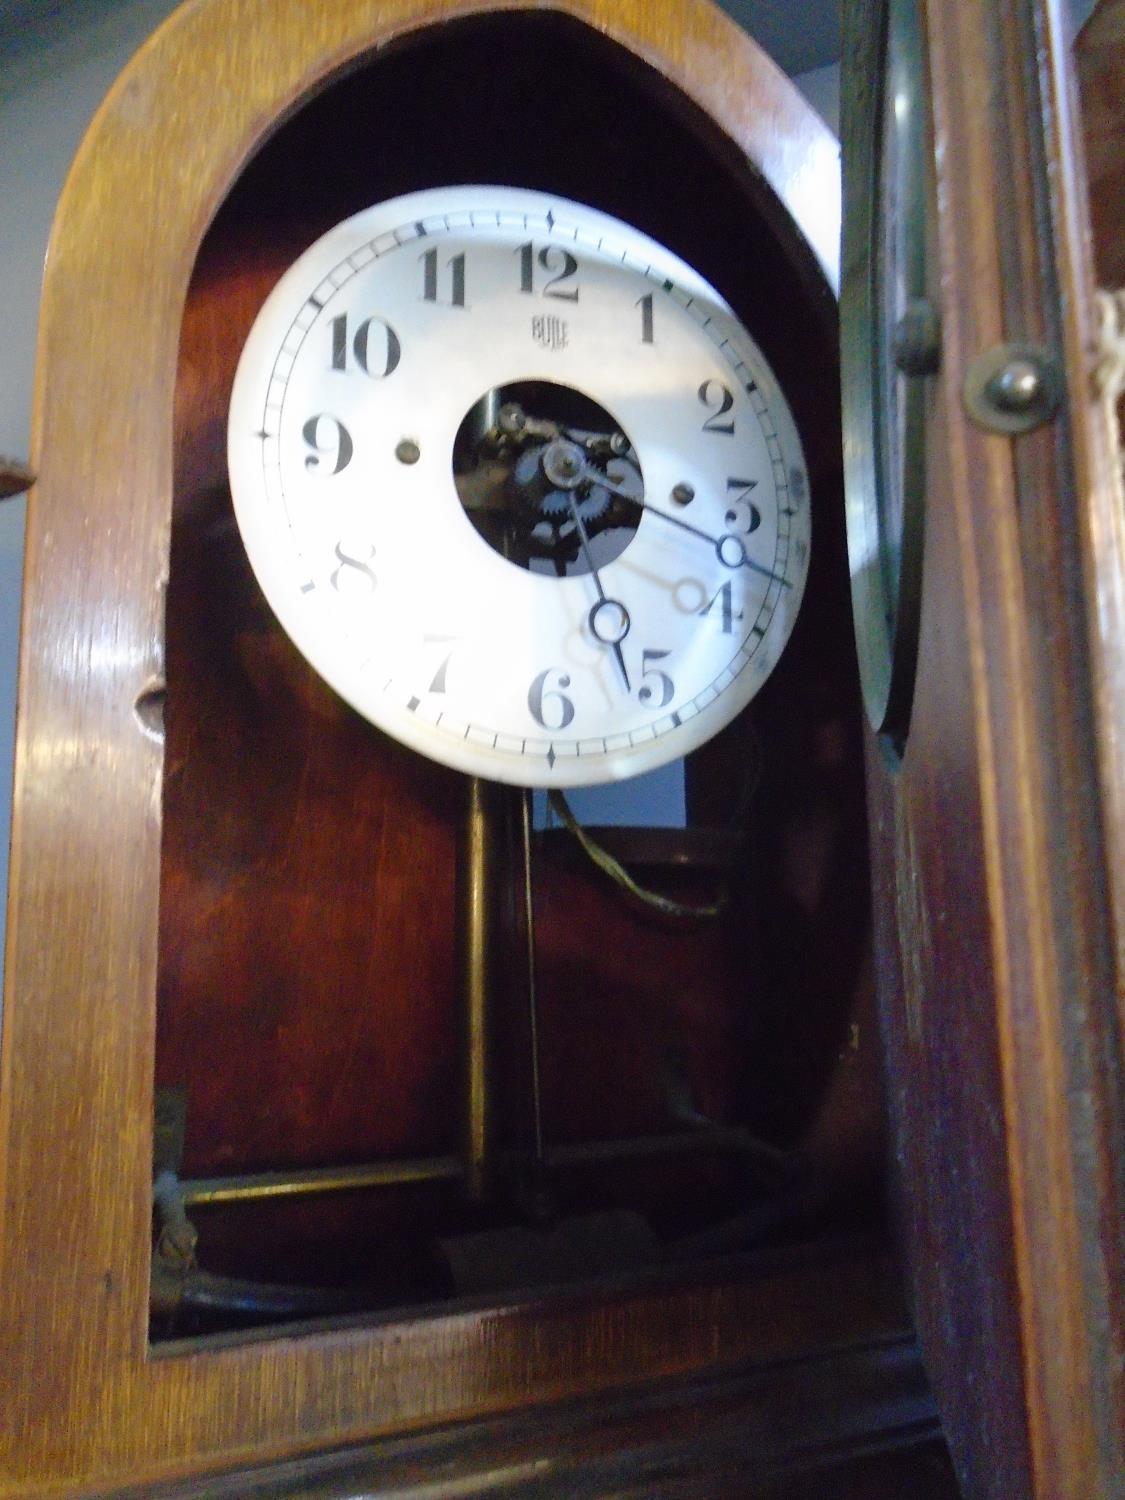 Two early 20th century Bulle patent mantle clocks, one in a light oak case with arched inlaid walnut - Image 3 of 5